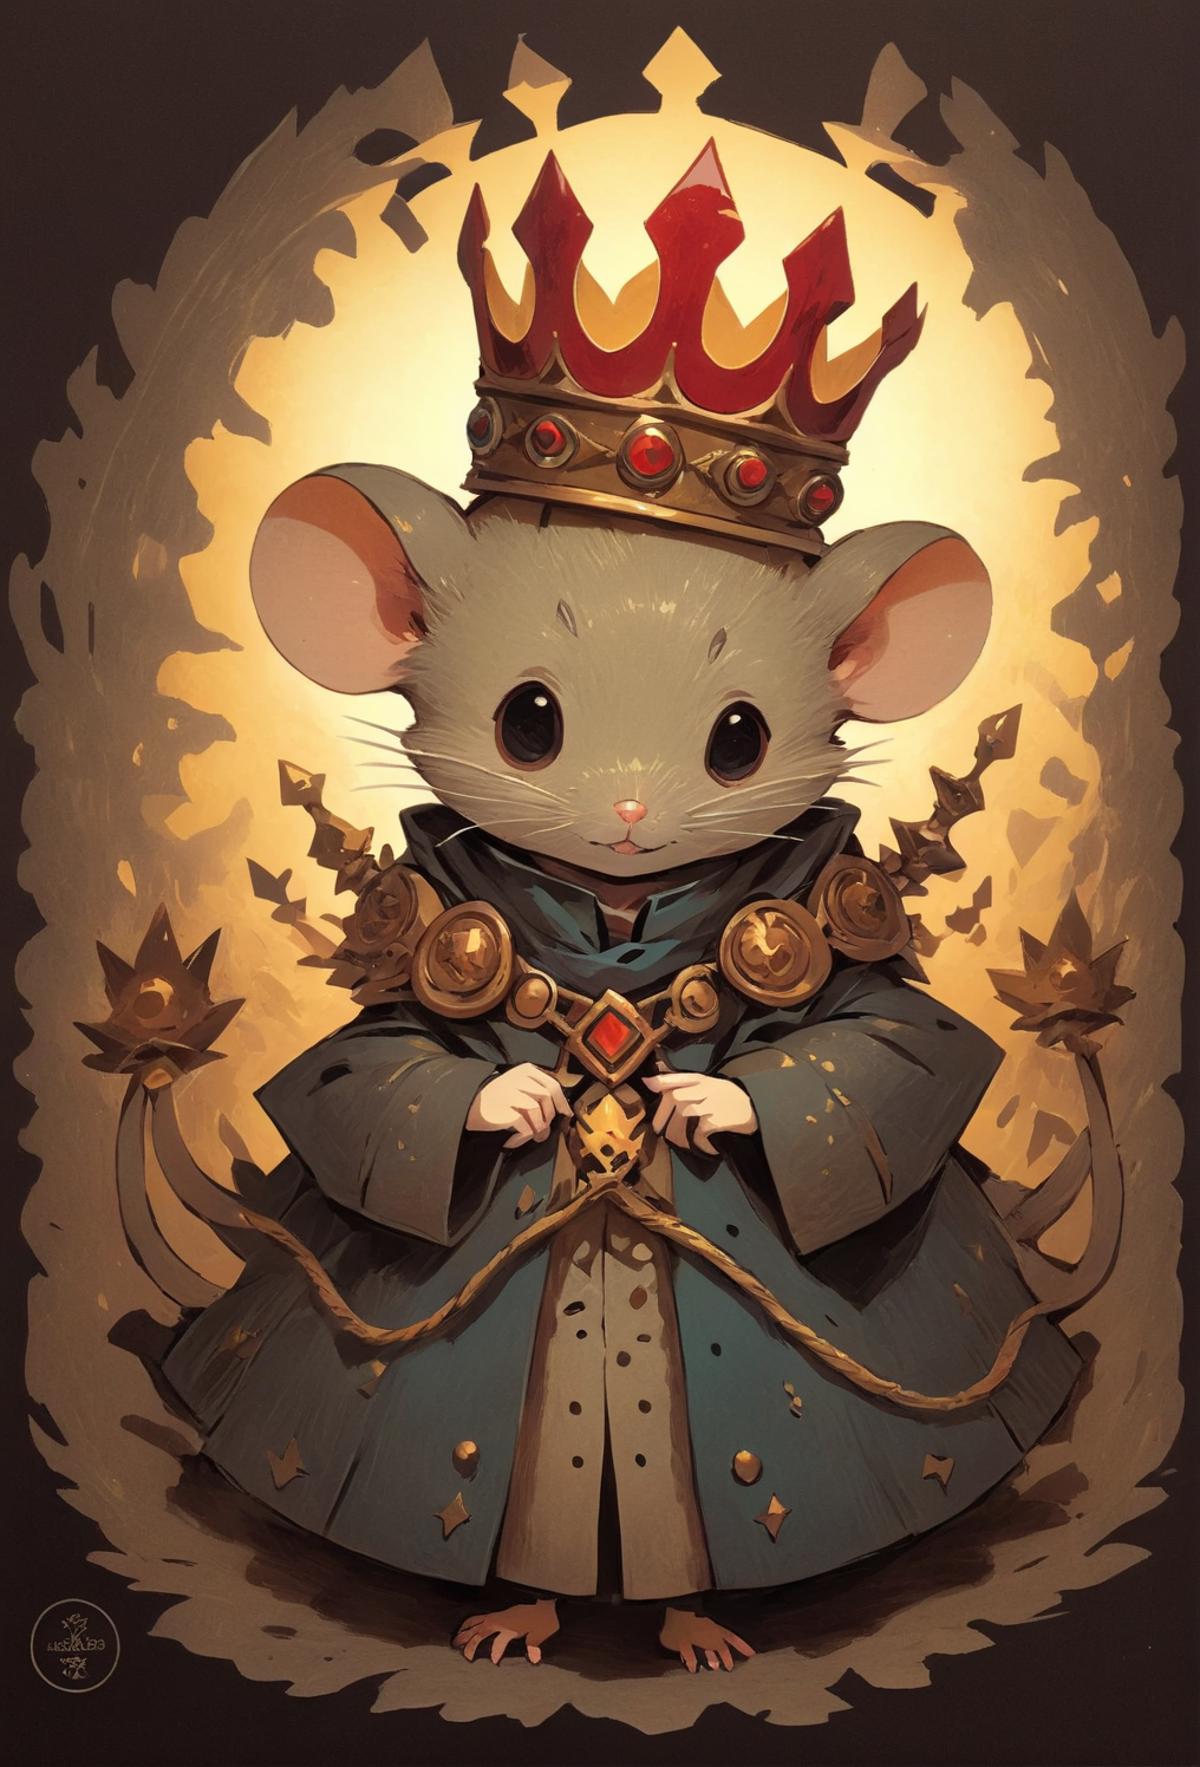 A mouse wearing a crown and a blue robe.